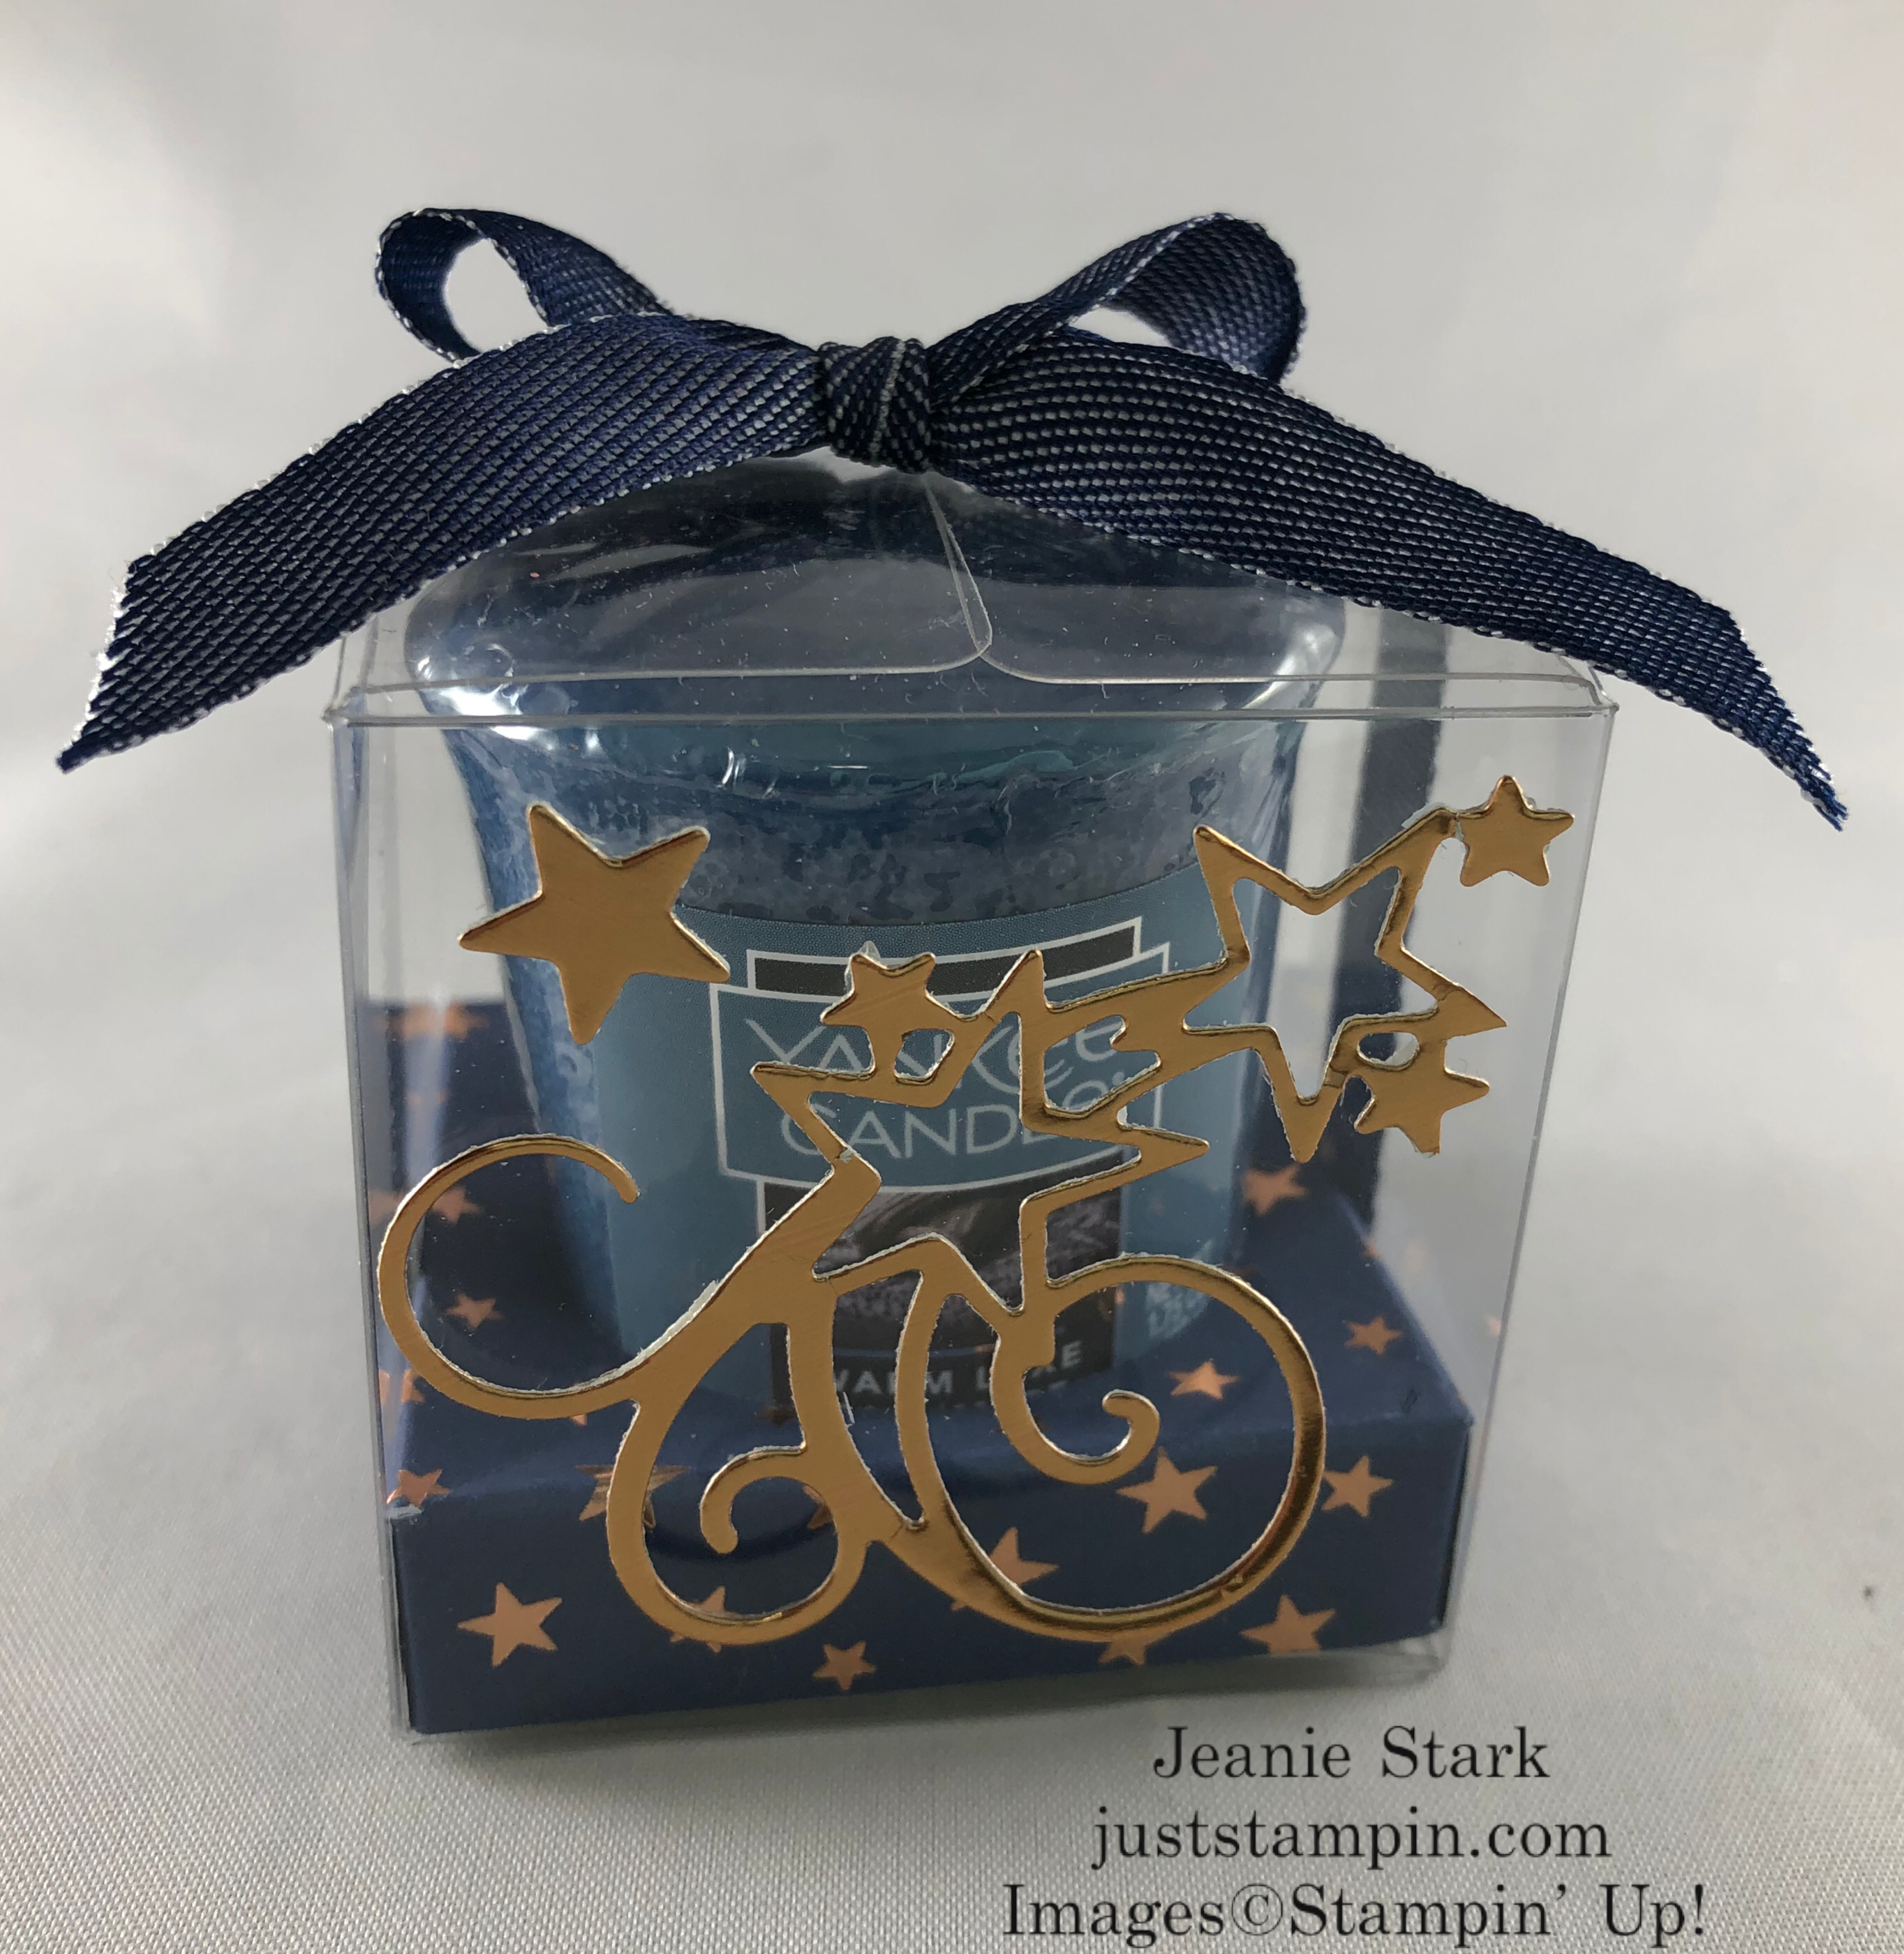 Stampin Up! Stitched Stars Clear Treat Box Yankee candle gift idea with Brightly Gleaming Designer Series Paper - Jeanie Stark StampinUp